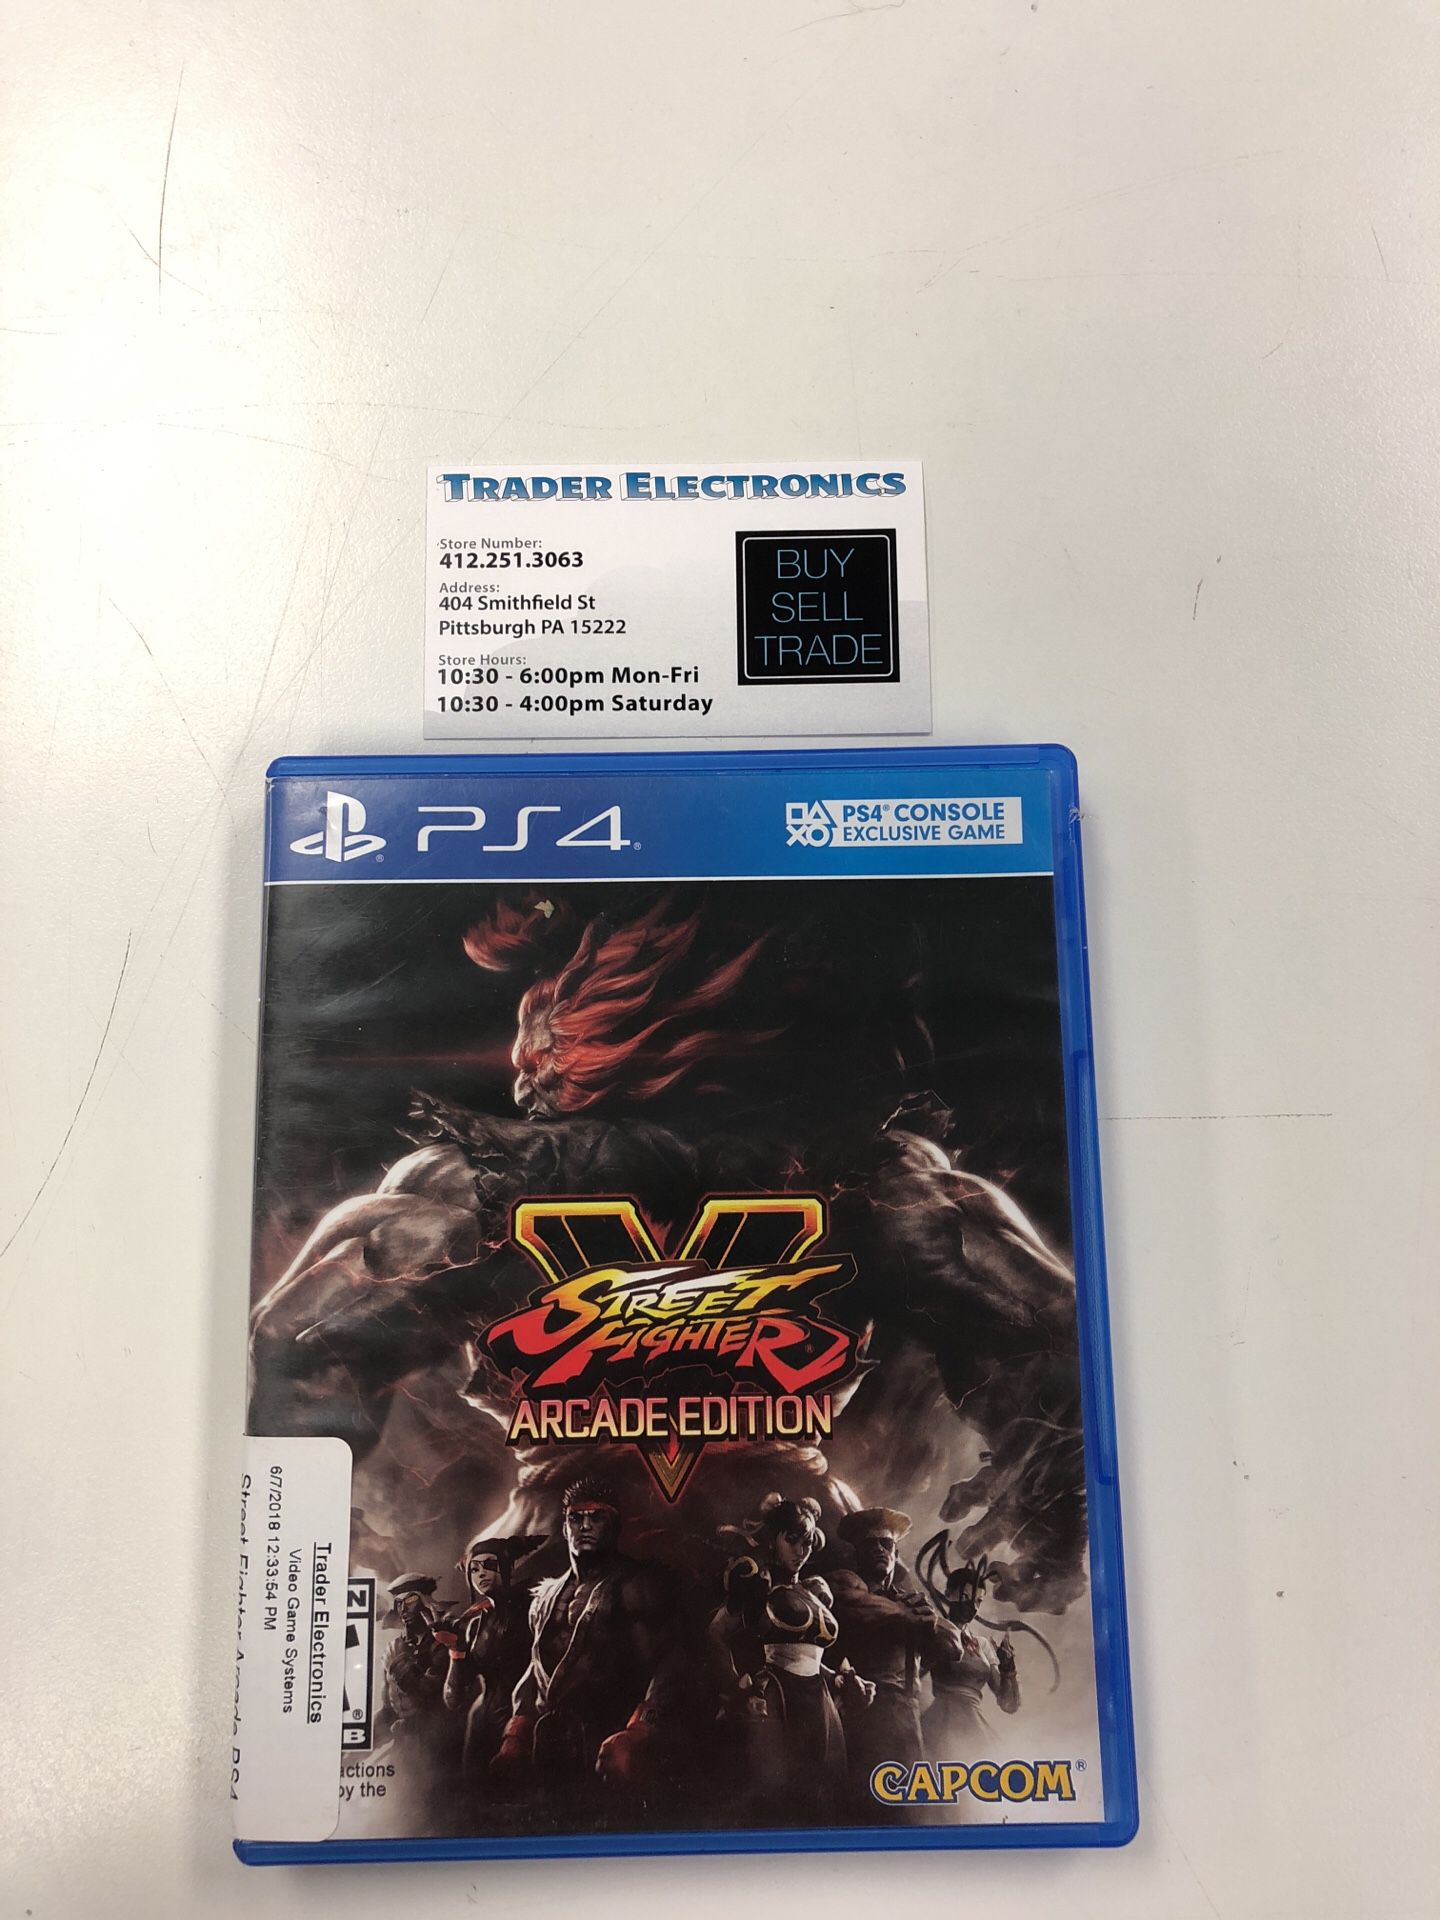 Street fighter arcade edition ps4